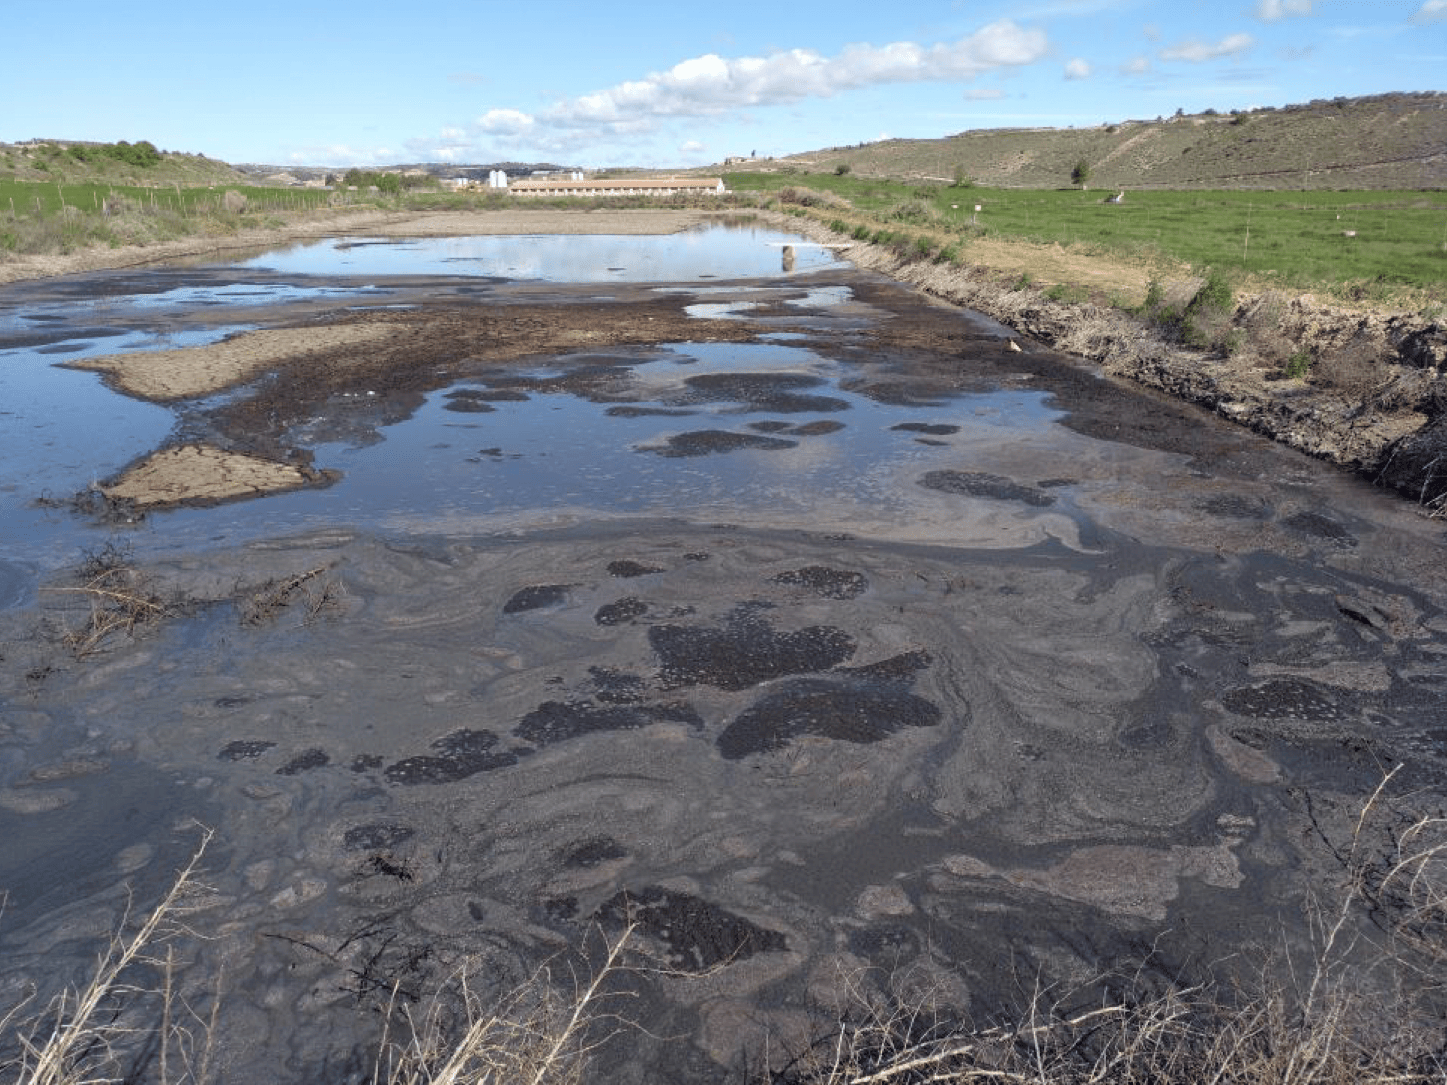 Photo of the large slurry pond at the Piensos Costa S.A. pig farm. located in Peñalba (Huesca). Photograph included in the inspection report carried out in May 2019. According to the inspector, the waterproofing layer is not visible in the image and no fencing has been carried out